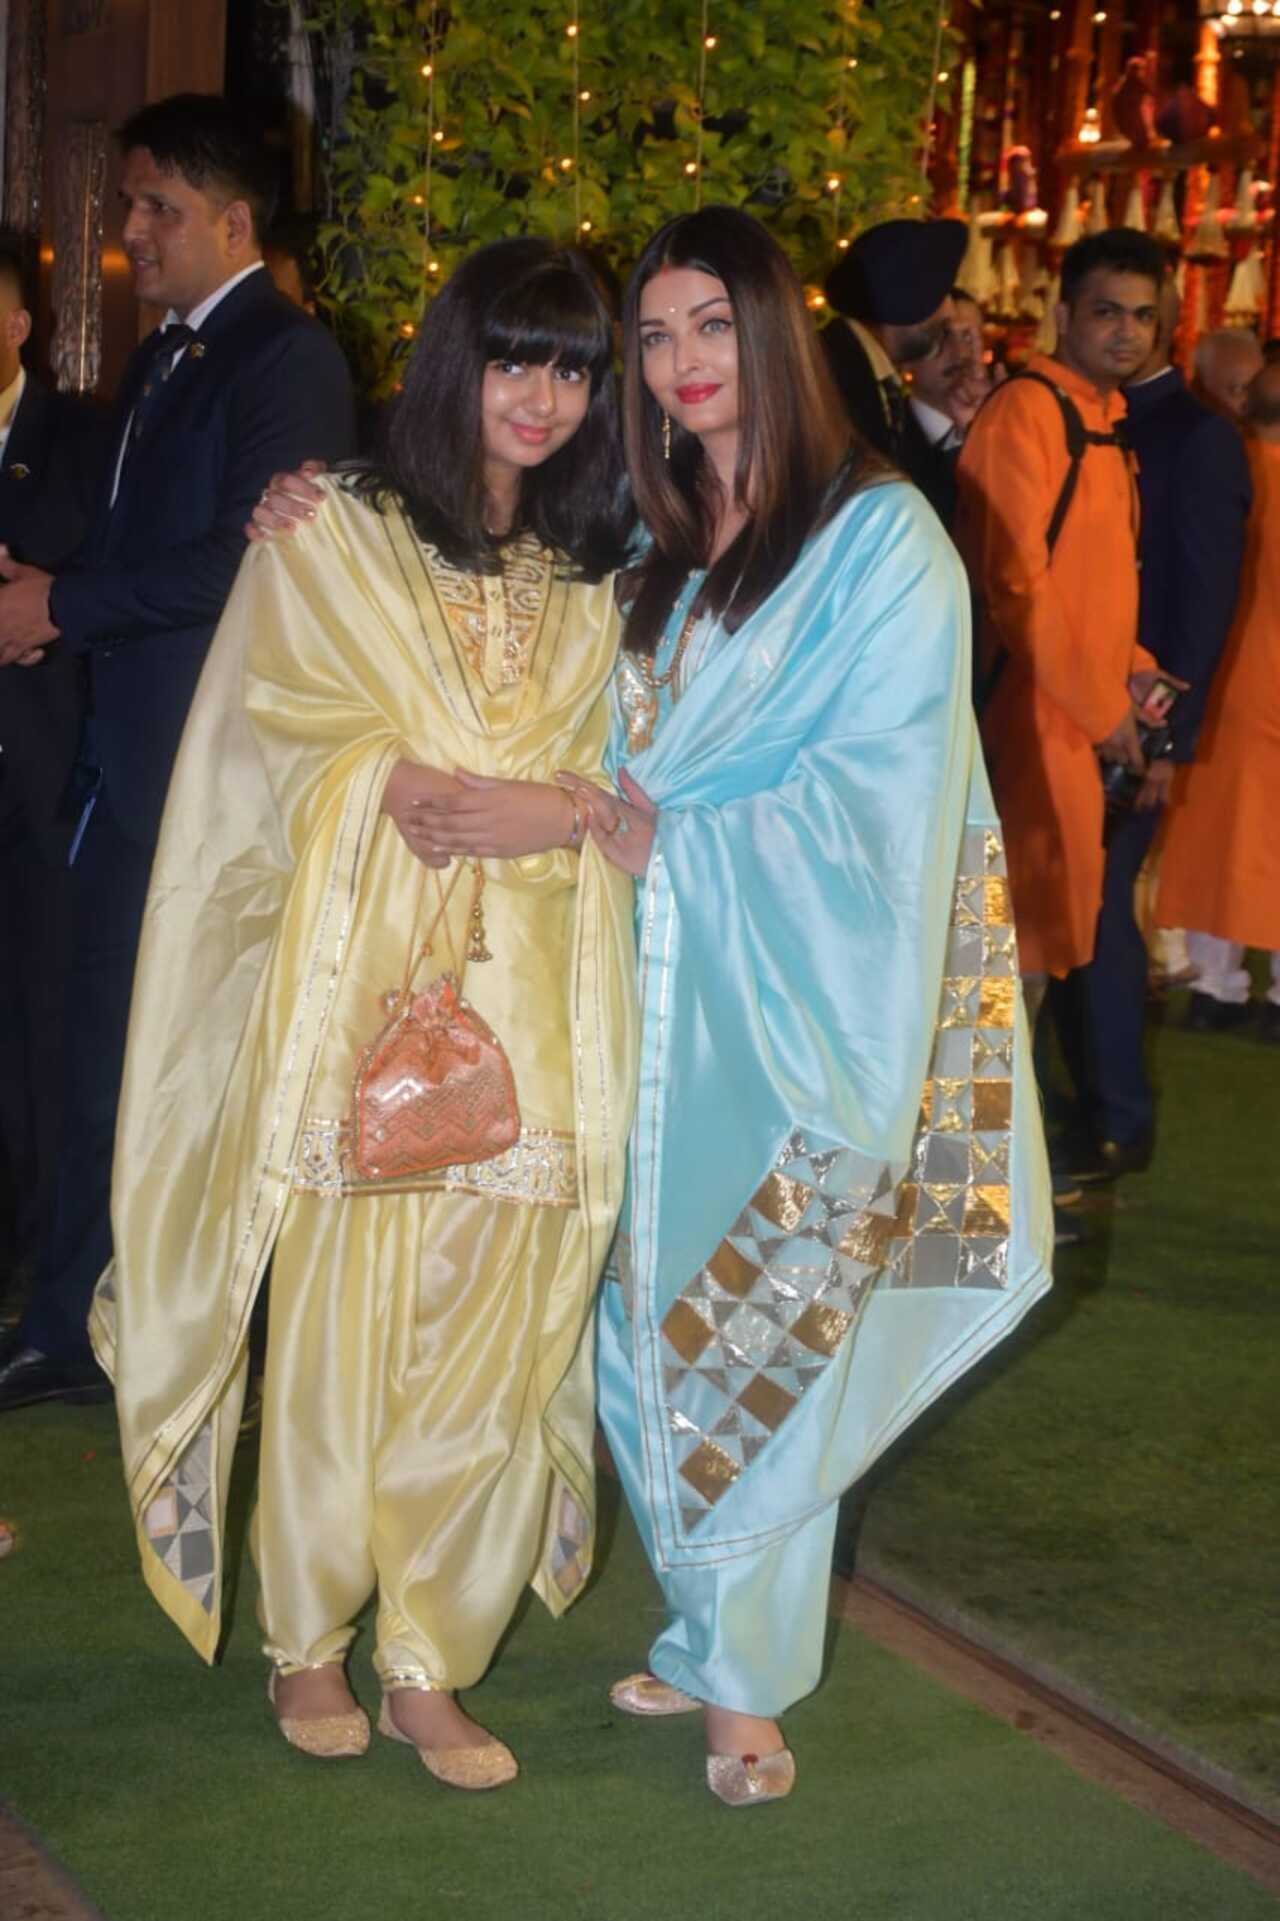 Aishwarya Rai Bachchan and her daughter Aaradhya Bachchan attended the ceremony. They were wearing Patiala suits